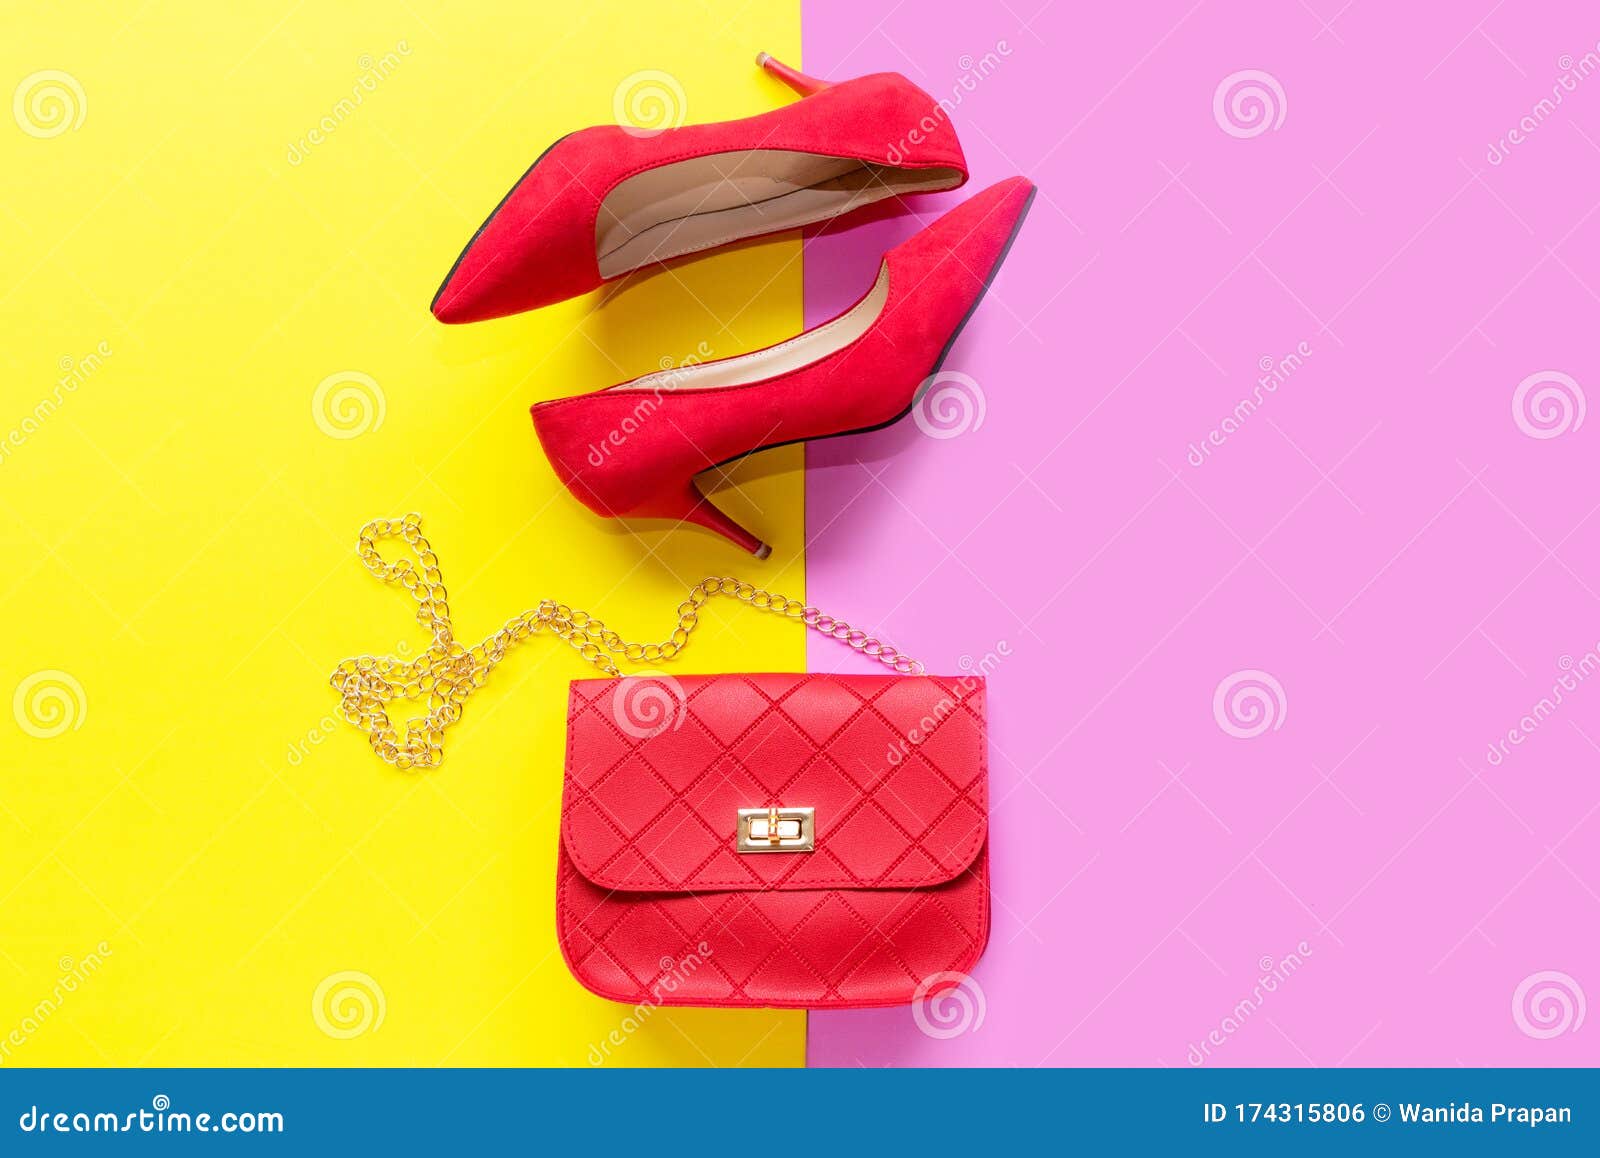 Fashion Red Bag and Shoe Woman Accessories Pastel Background. Stock ...